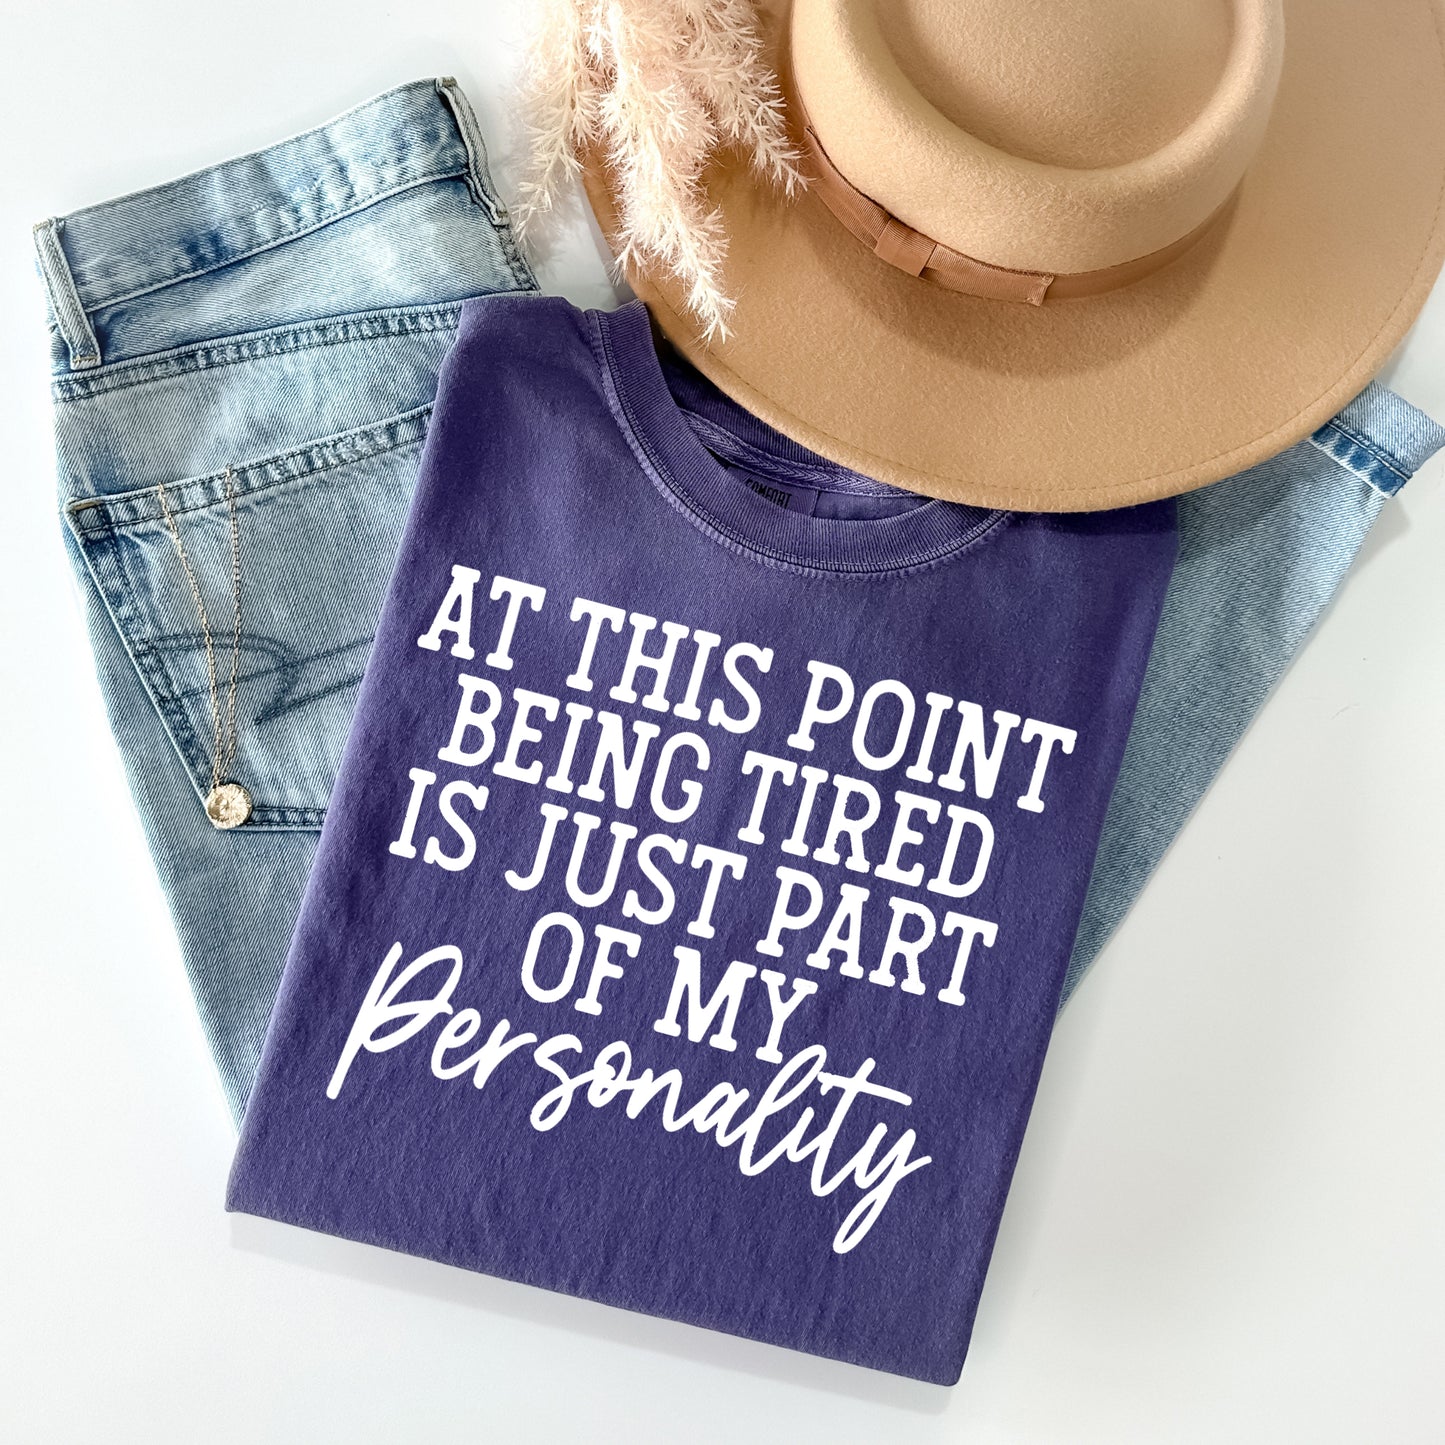 At This Point Being Tired is Just Part of My Personality Graphic Tee